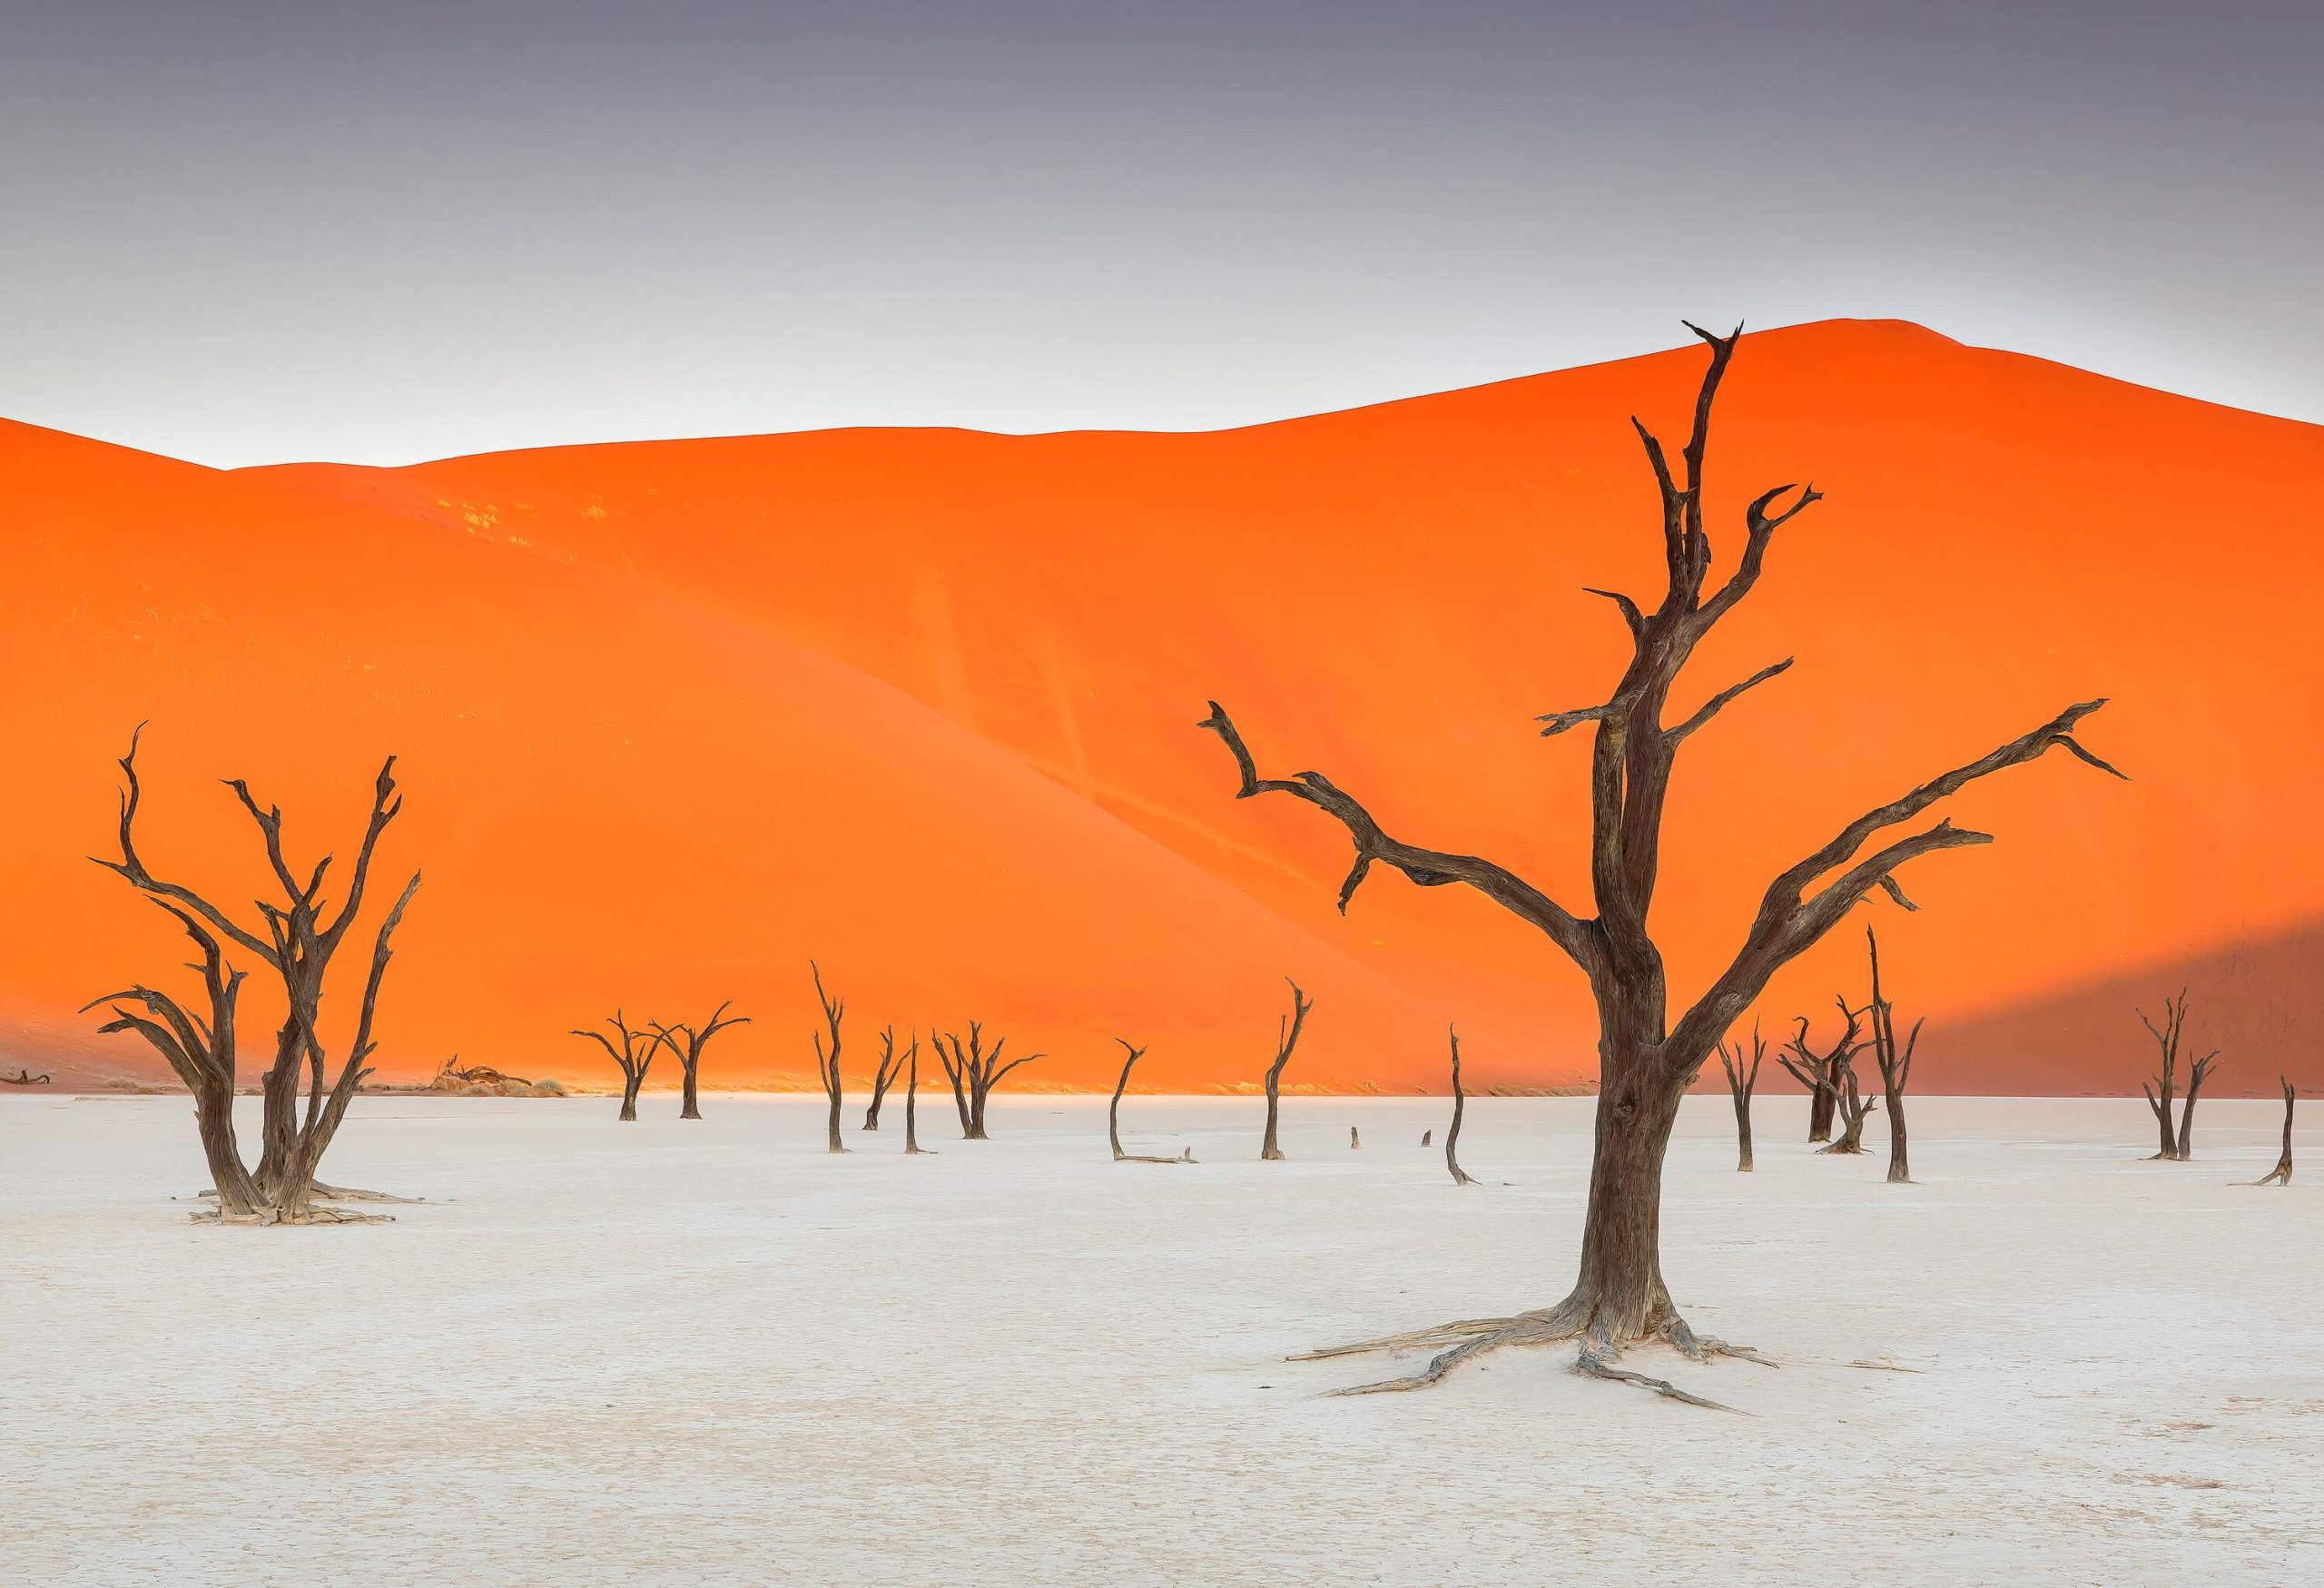 Dead desert trees across a dry valley against a backdrop of red mounds of sand.